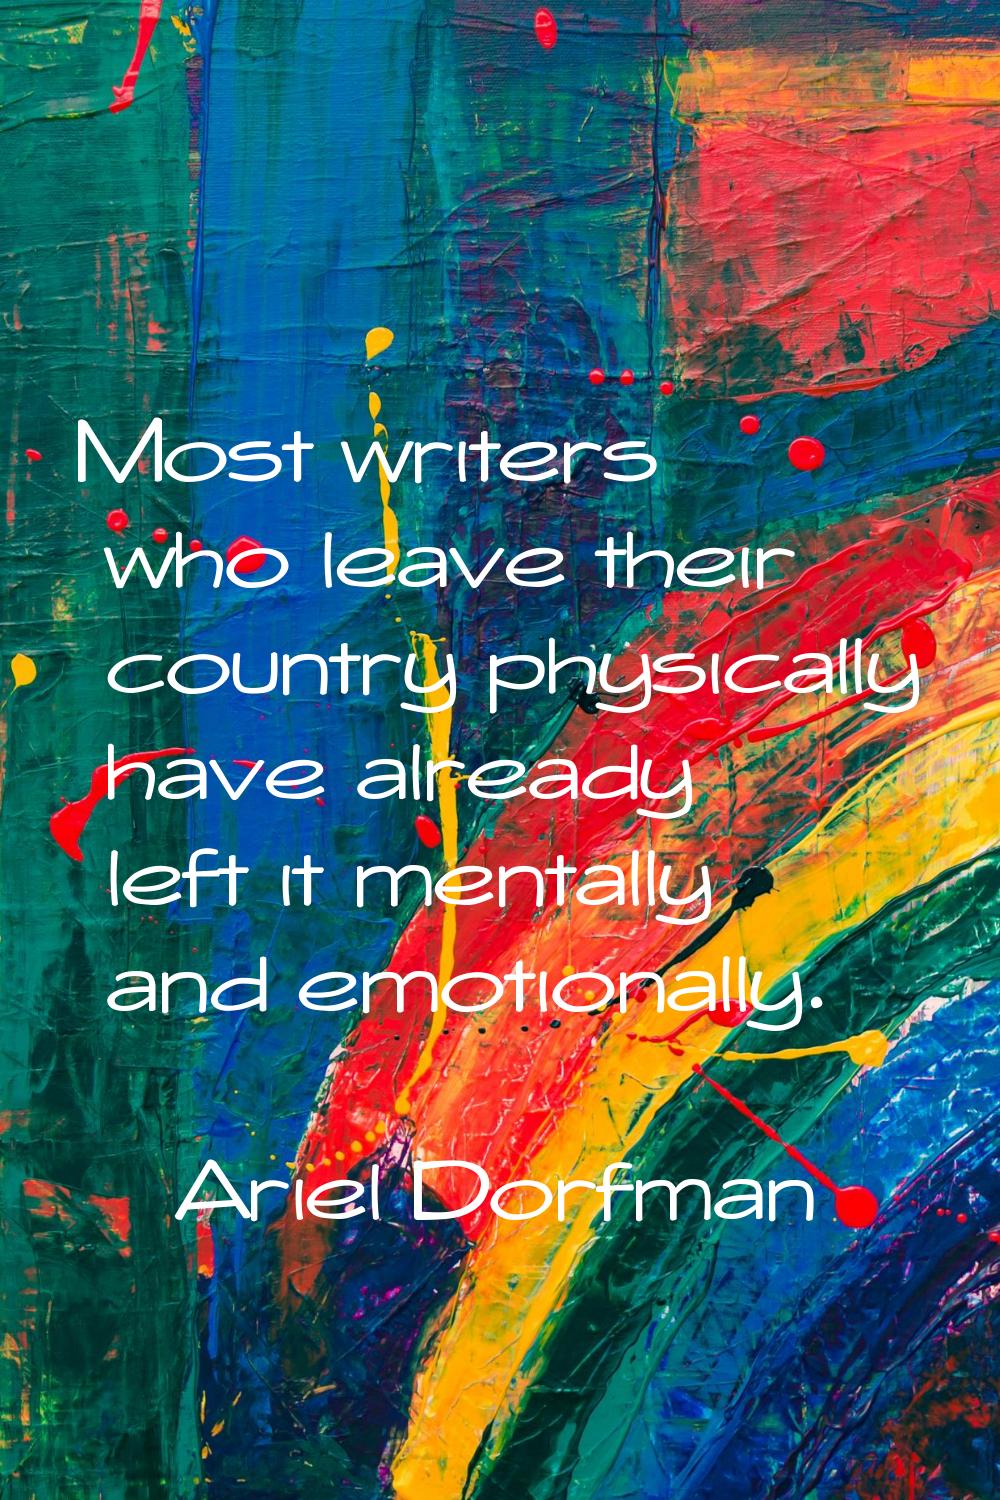 Most writers who leave their country physically have already left it mentally and emotionally.